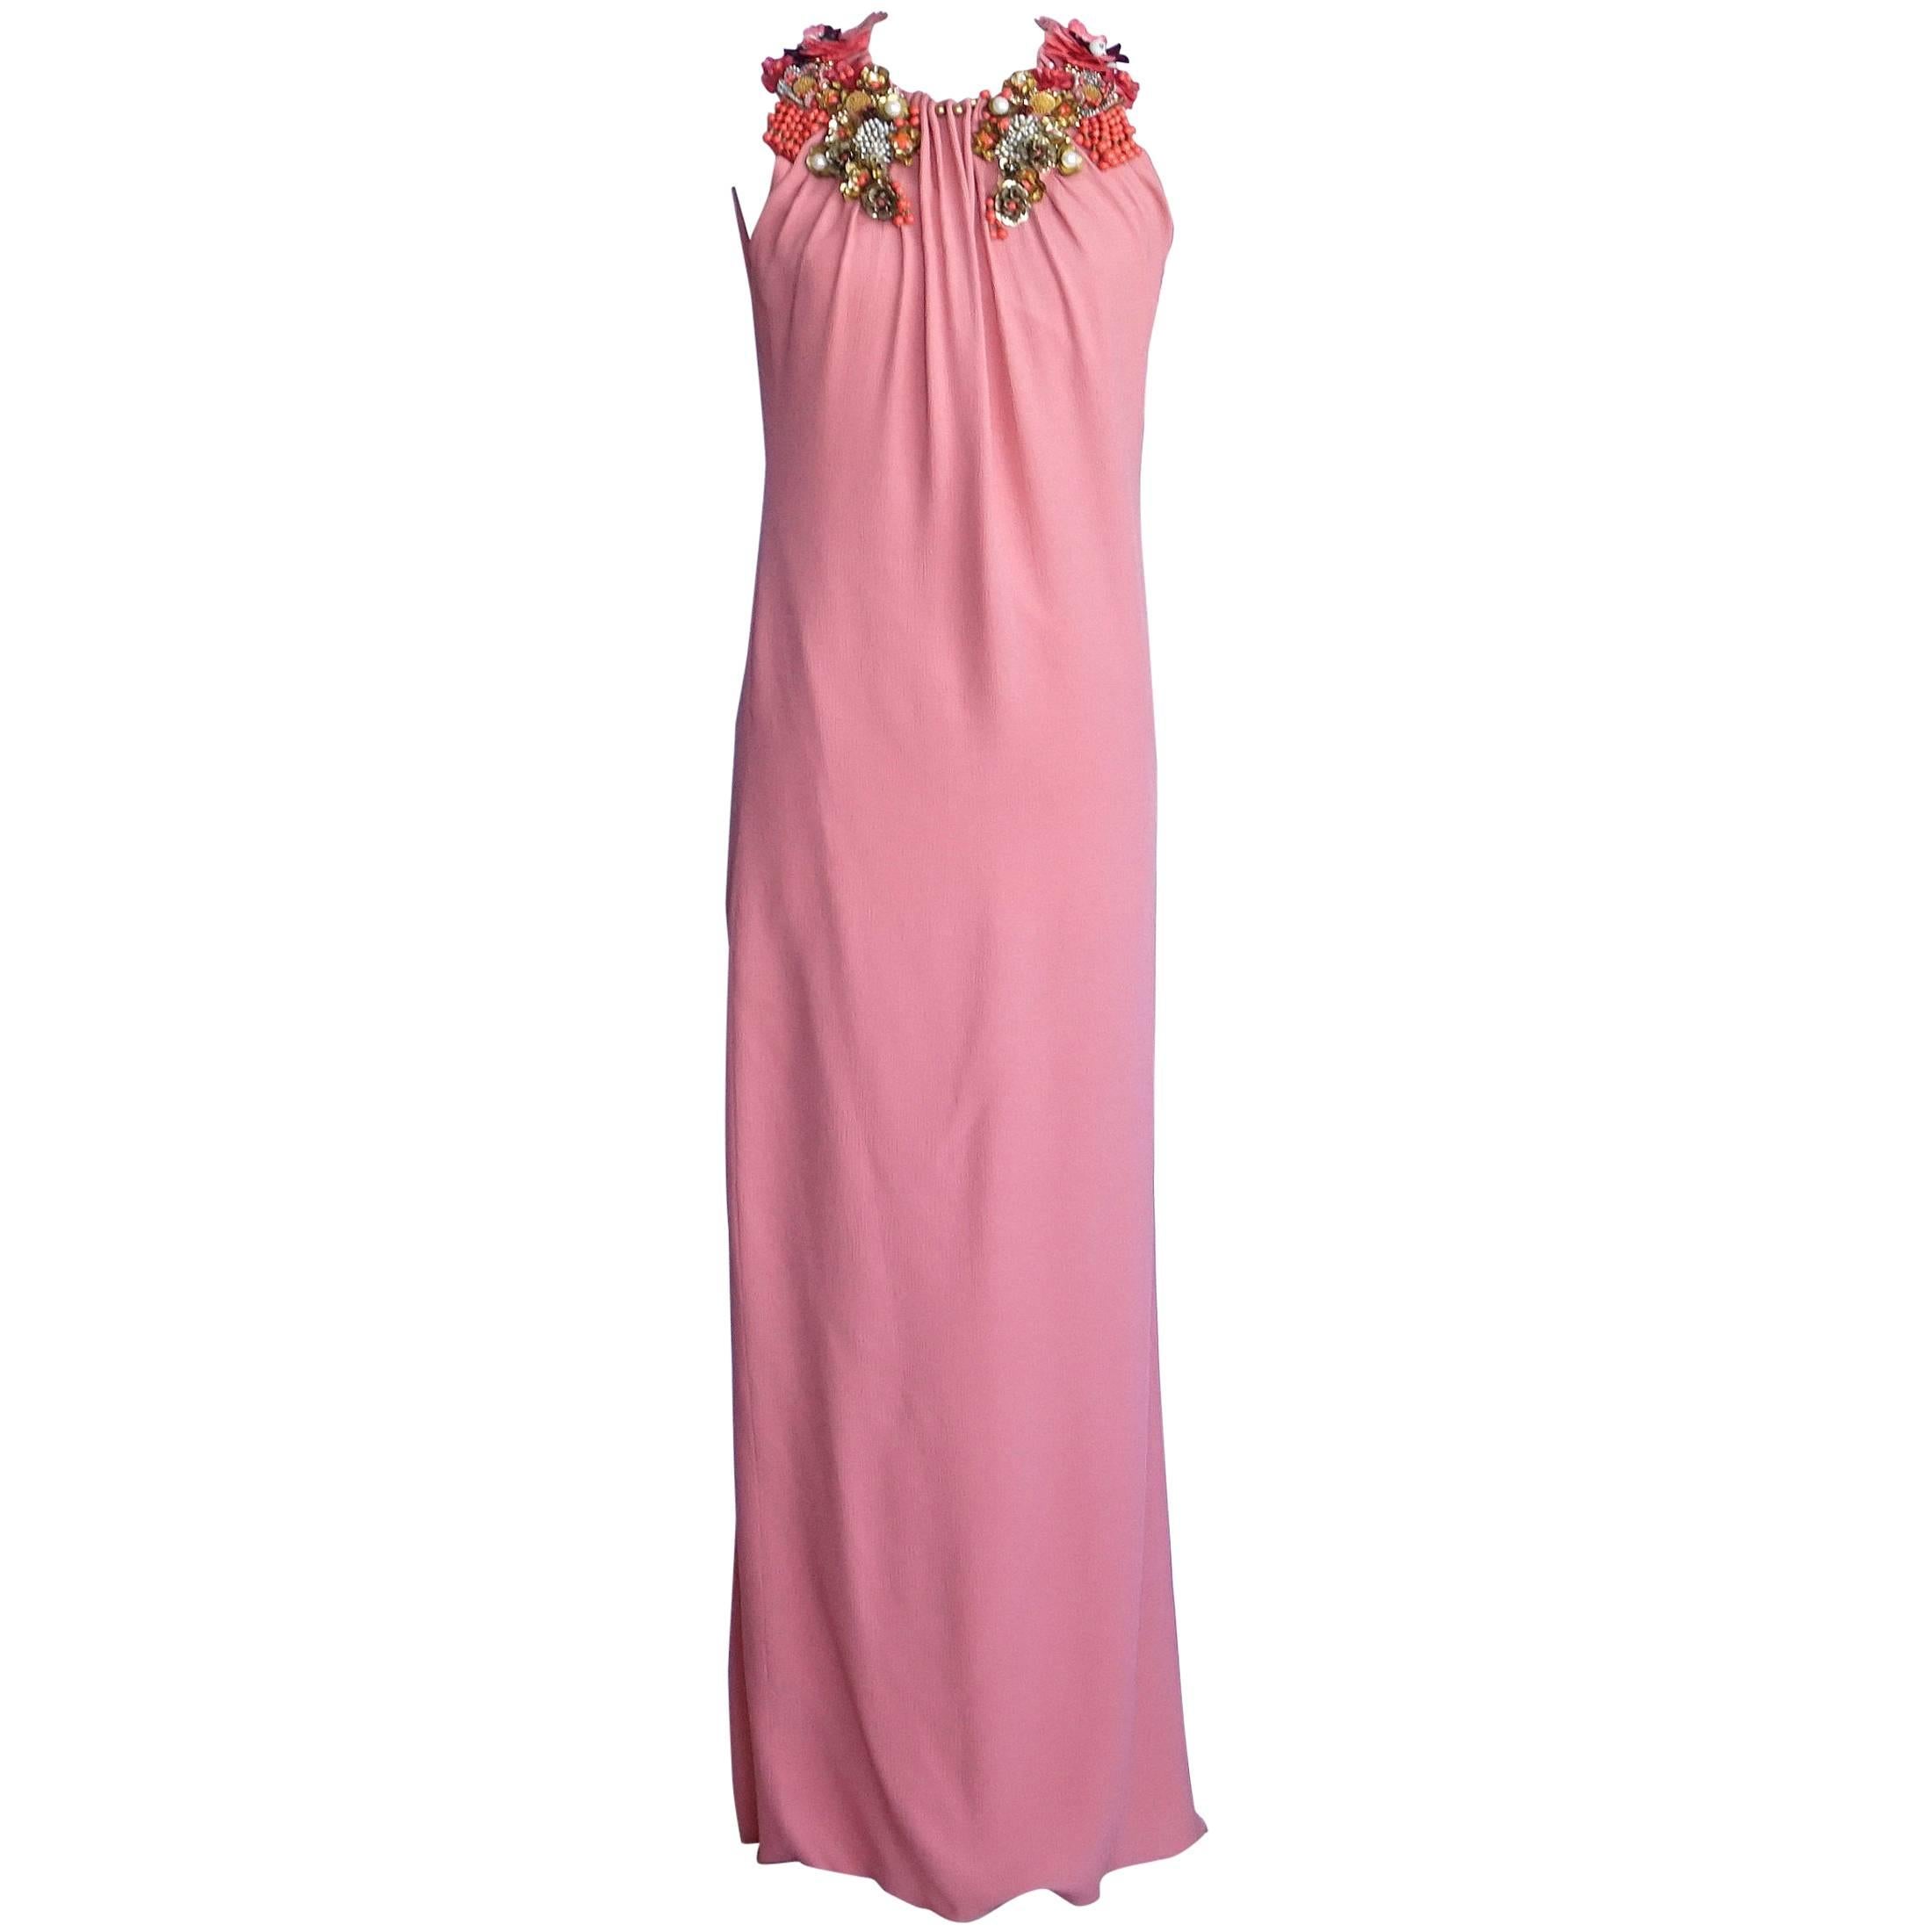 GUCCI dress exquisite jeweled neckline beautiful colour  38 / 4  nwt